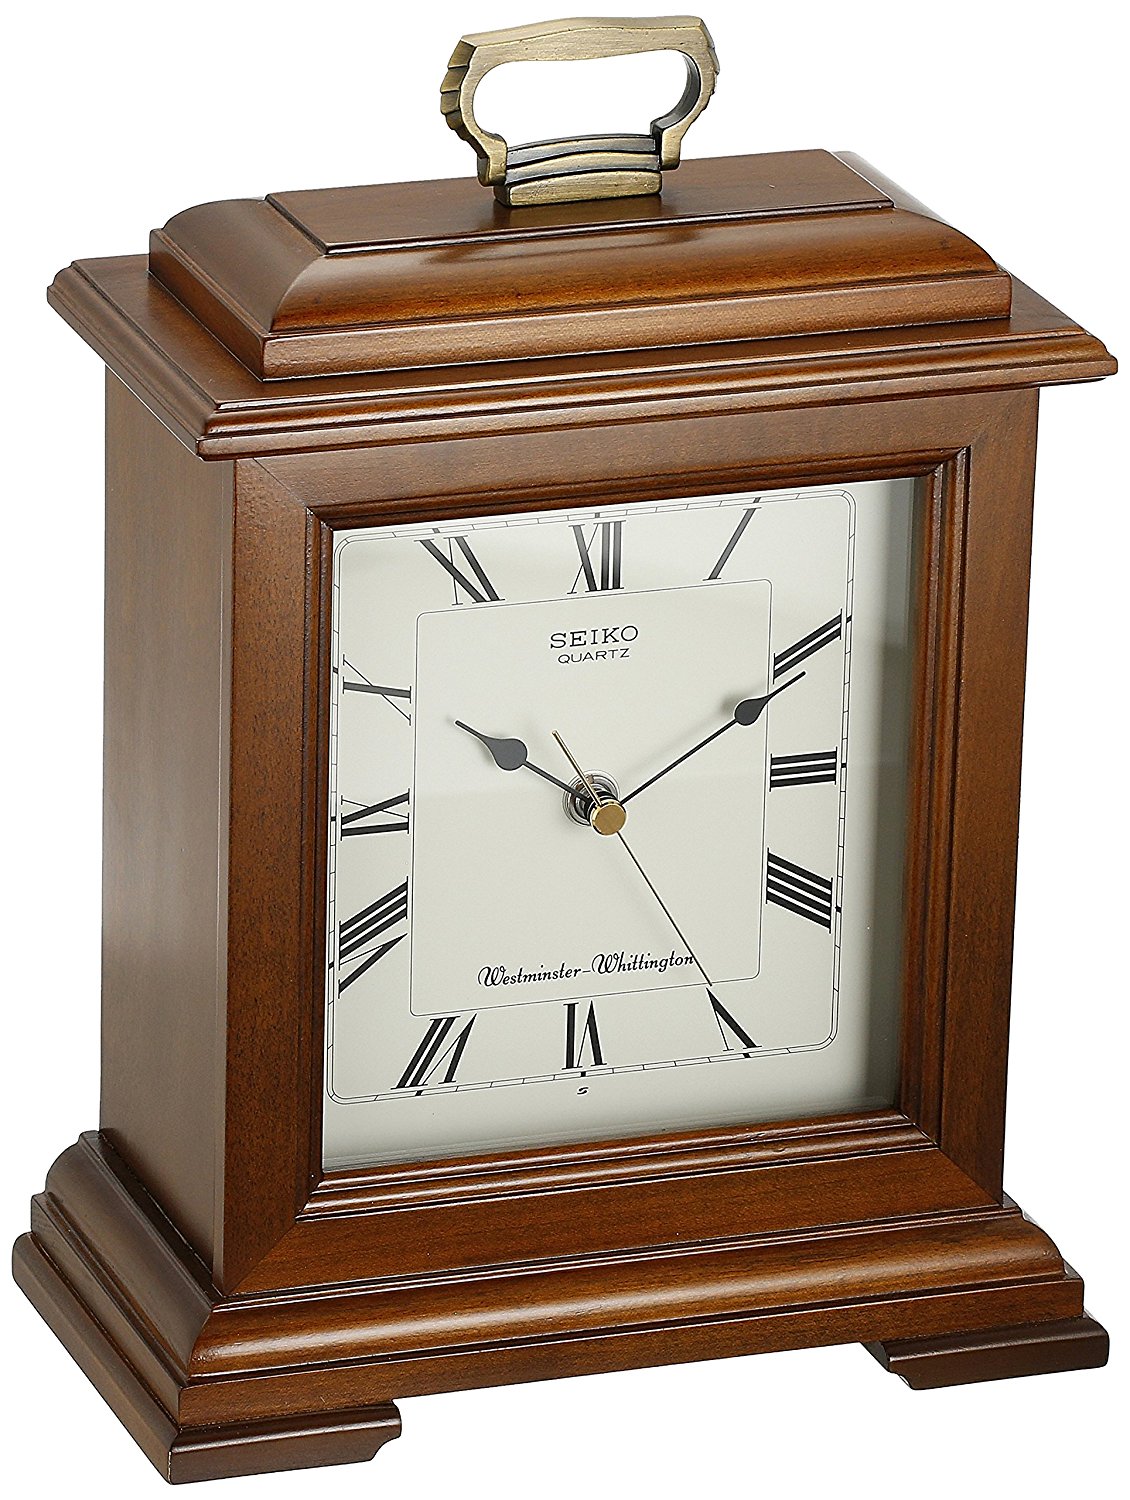 Seiko Mantel Chime Carriage Clock Cherry Finish Solid Wood Case